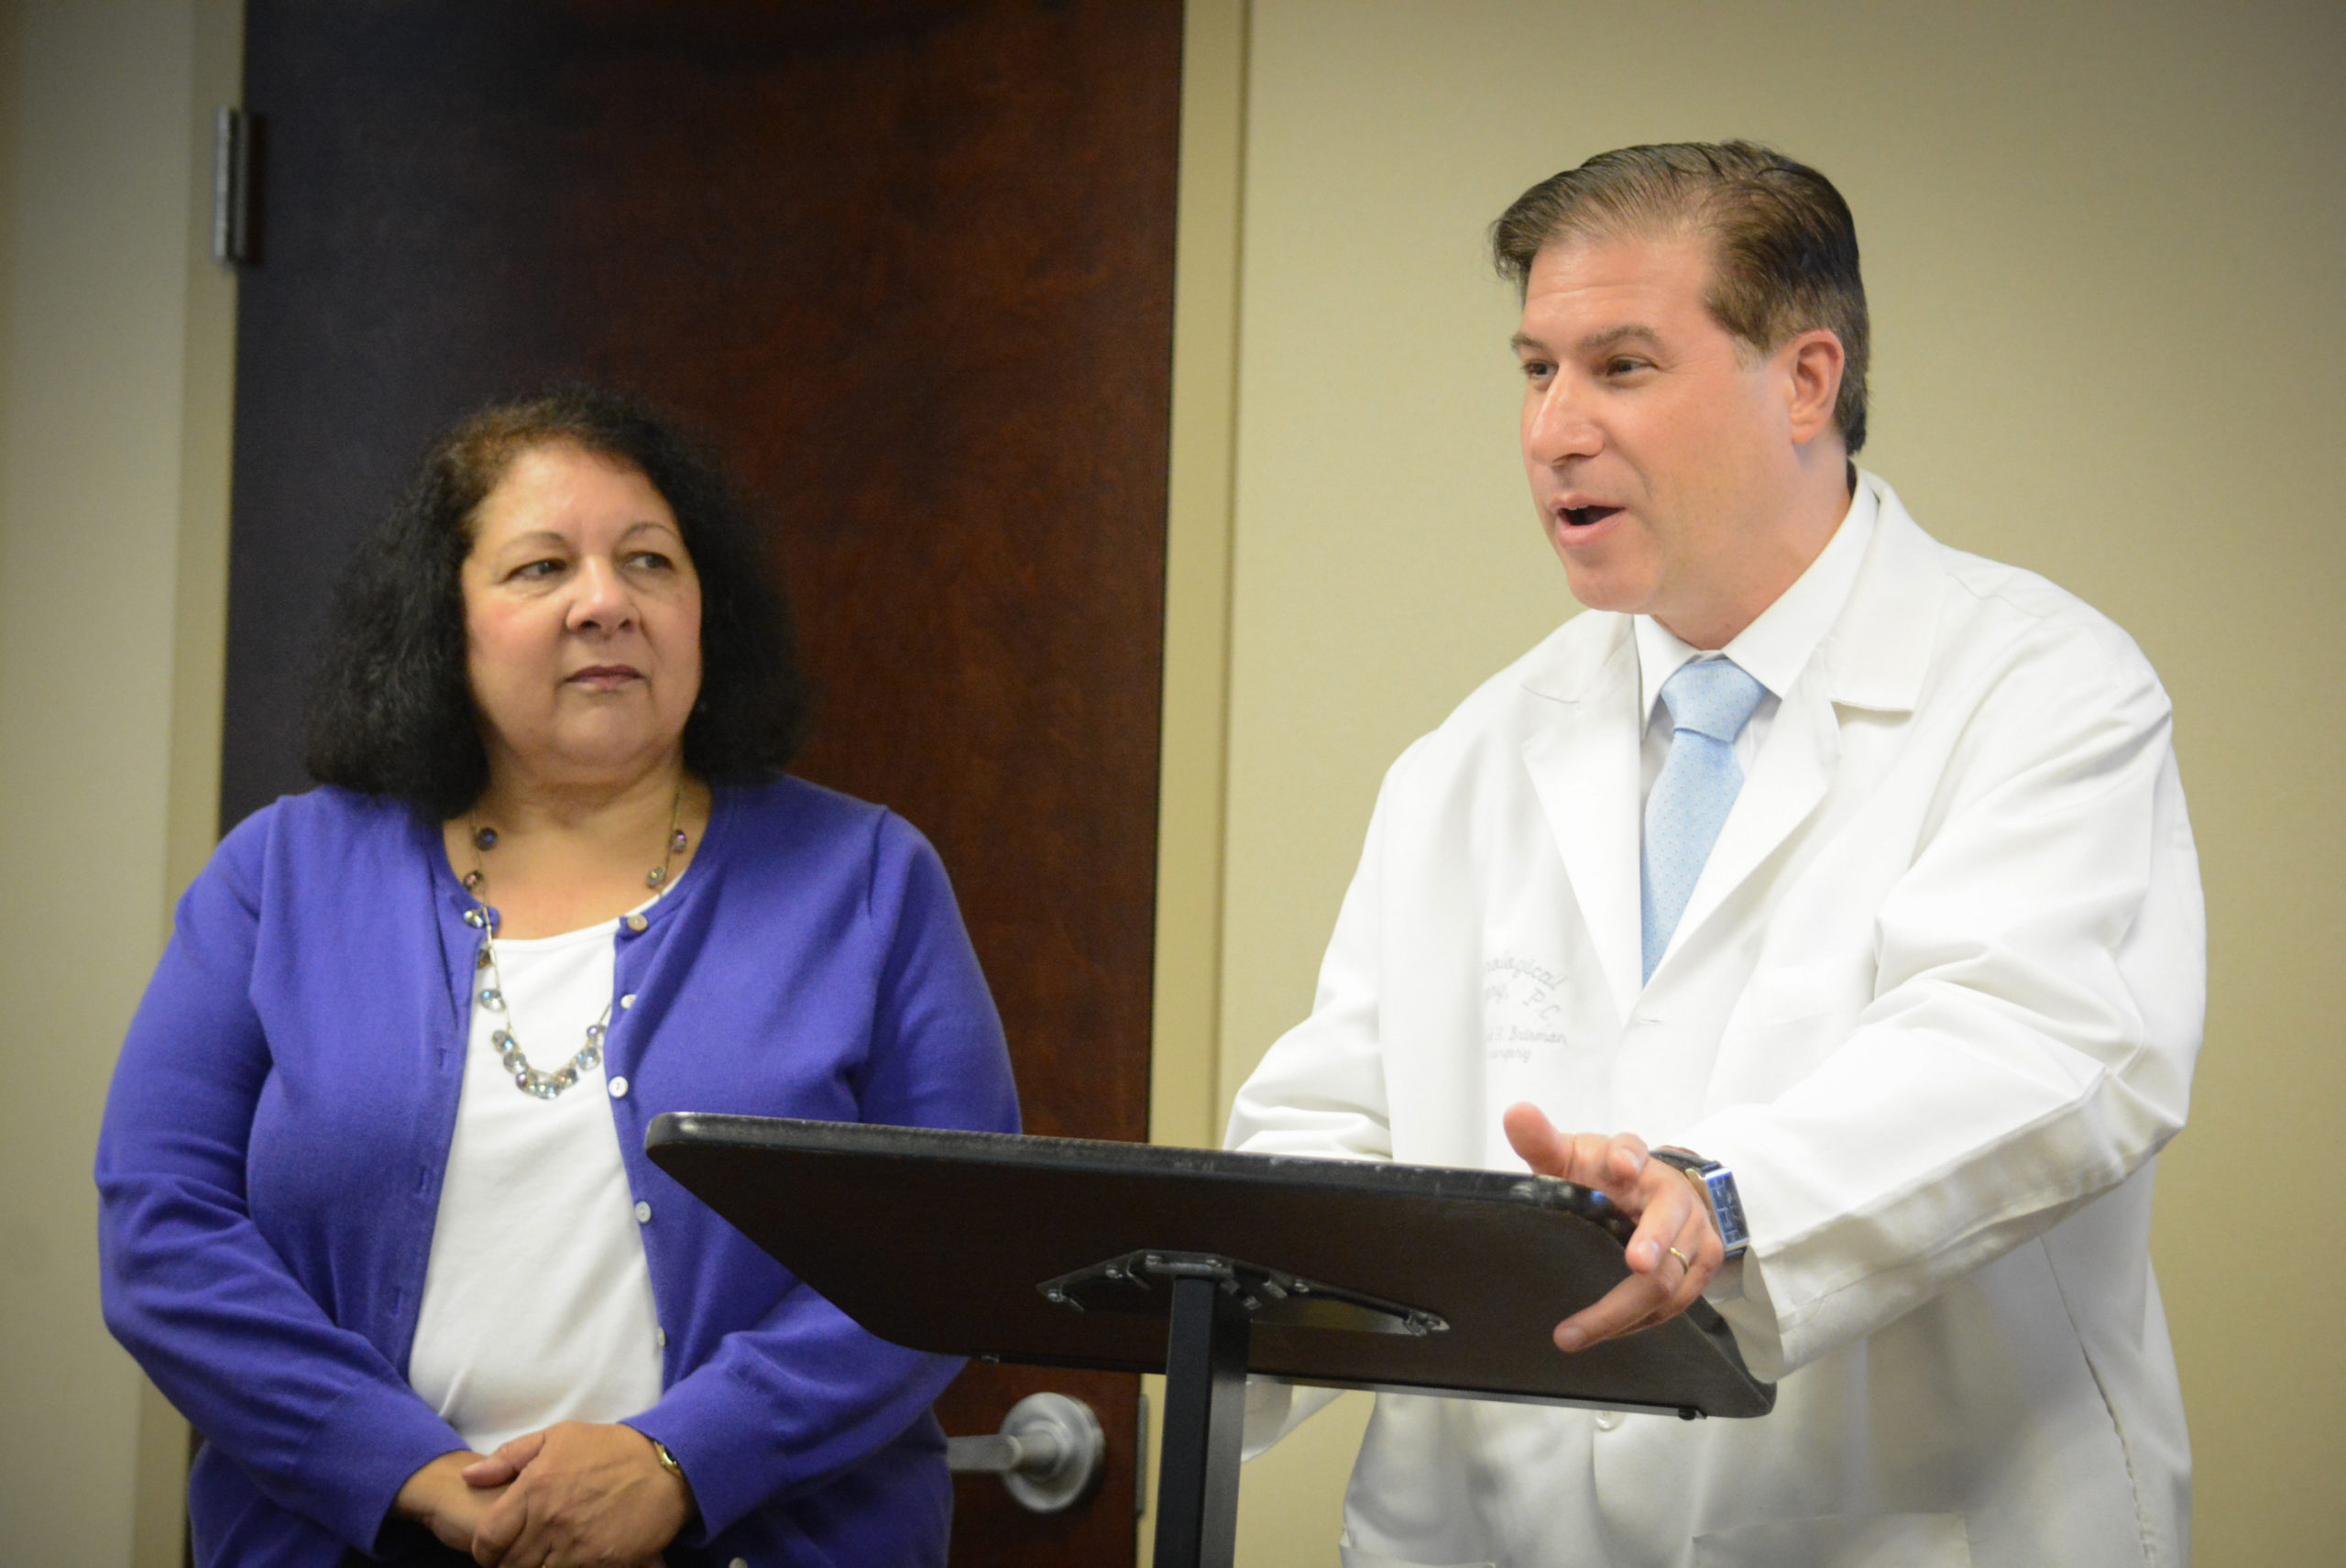 Dr. Michael Brisman, a neurosurgeon, and STEM education advocate Ray Ann Havasy announce the Neurological Surgery P.C. Health Science Competition. (Photo by Janelle Clausen)